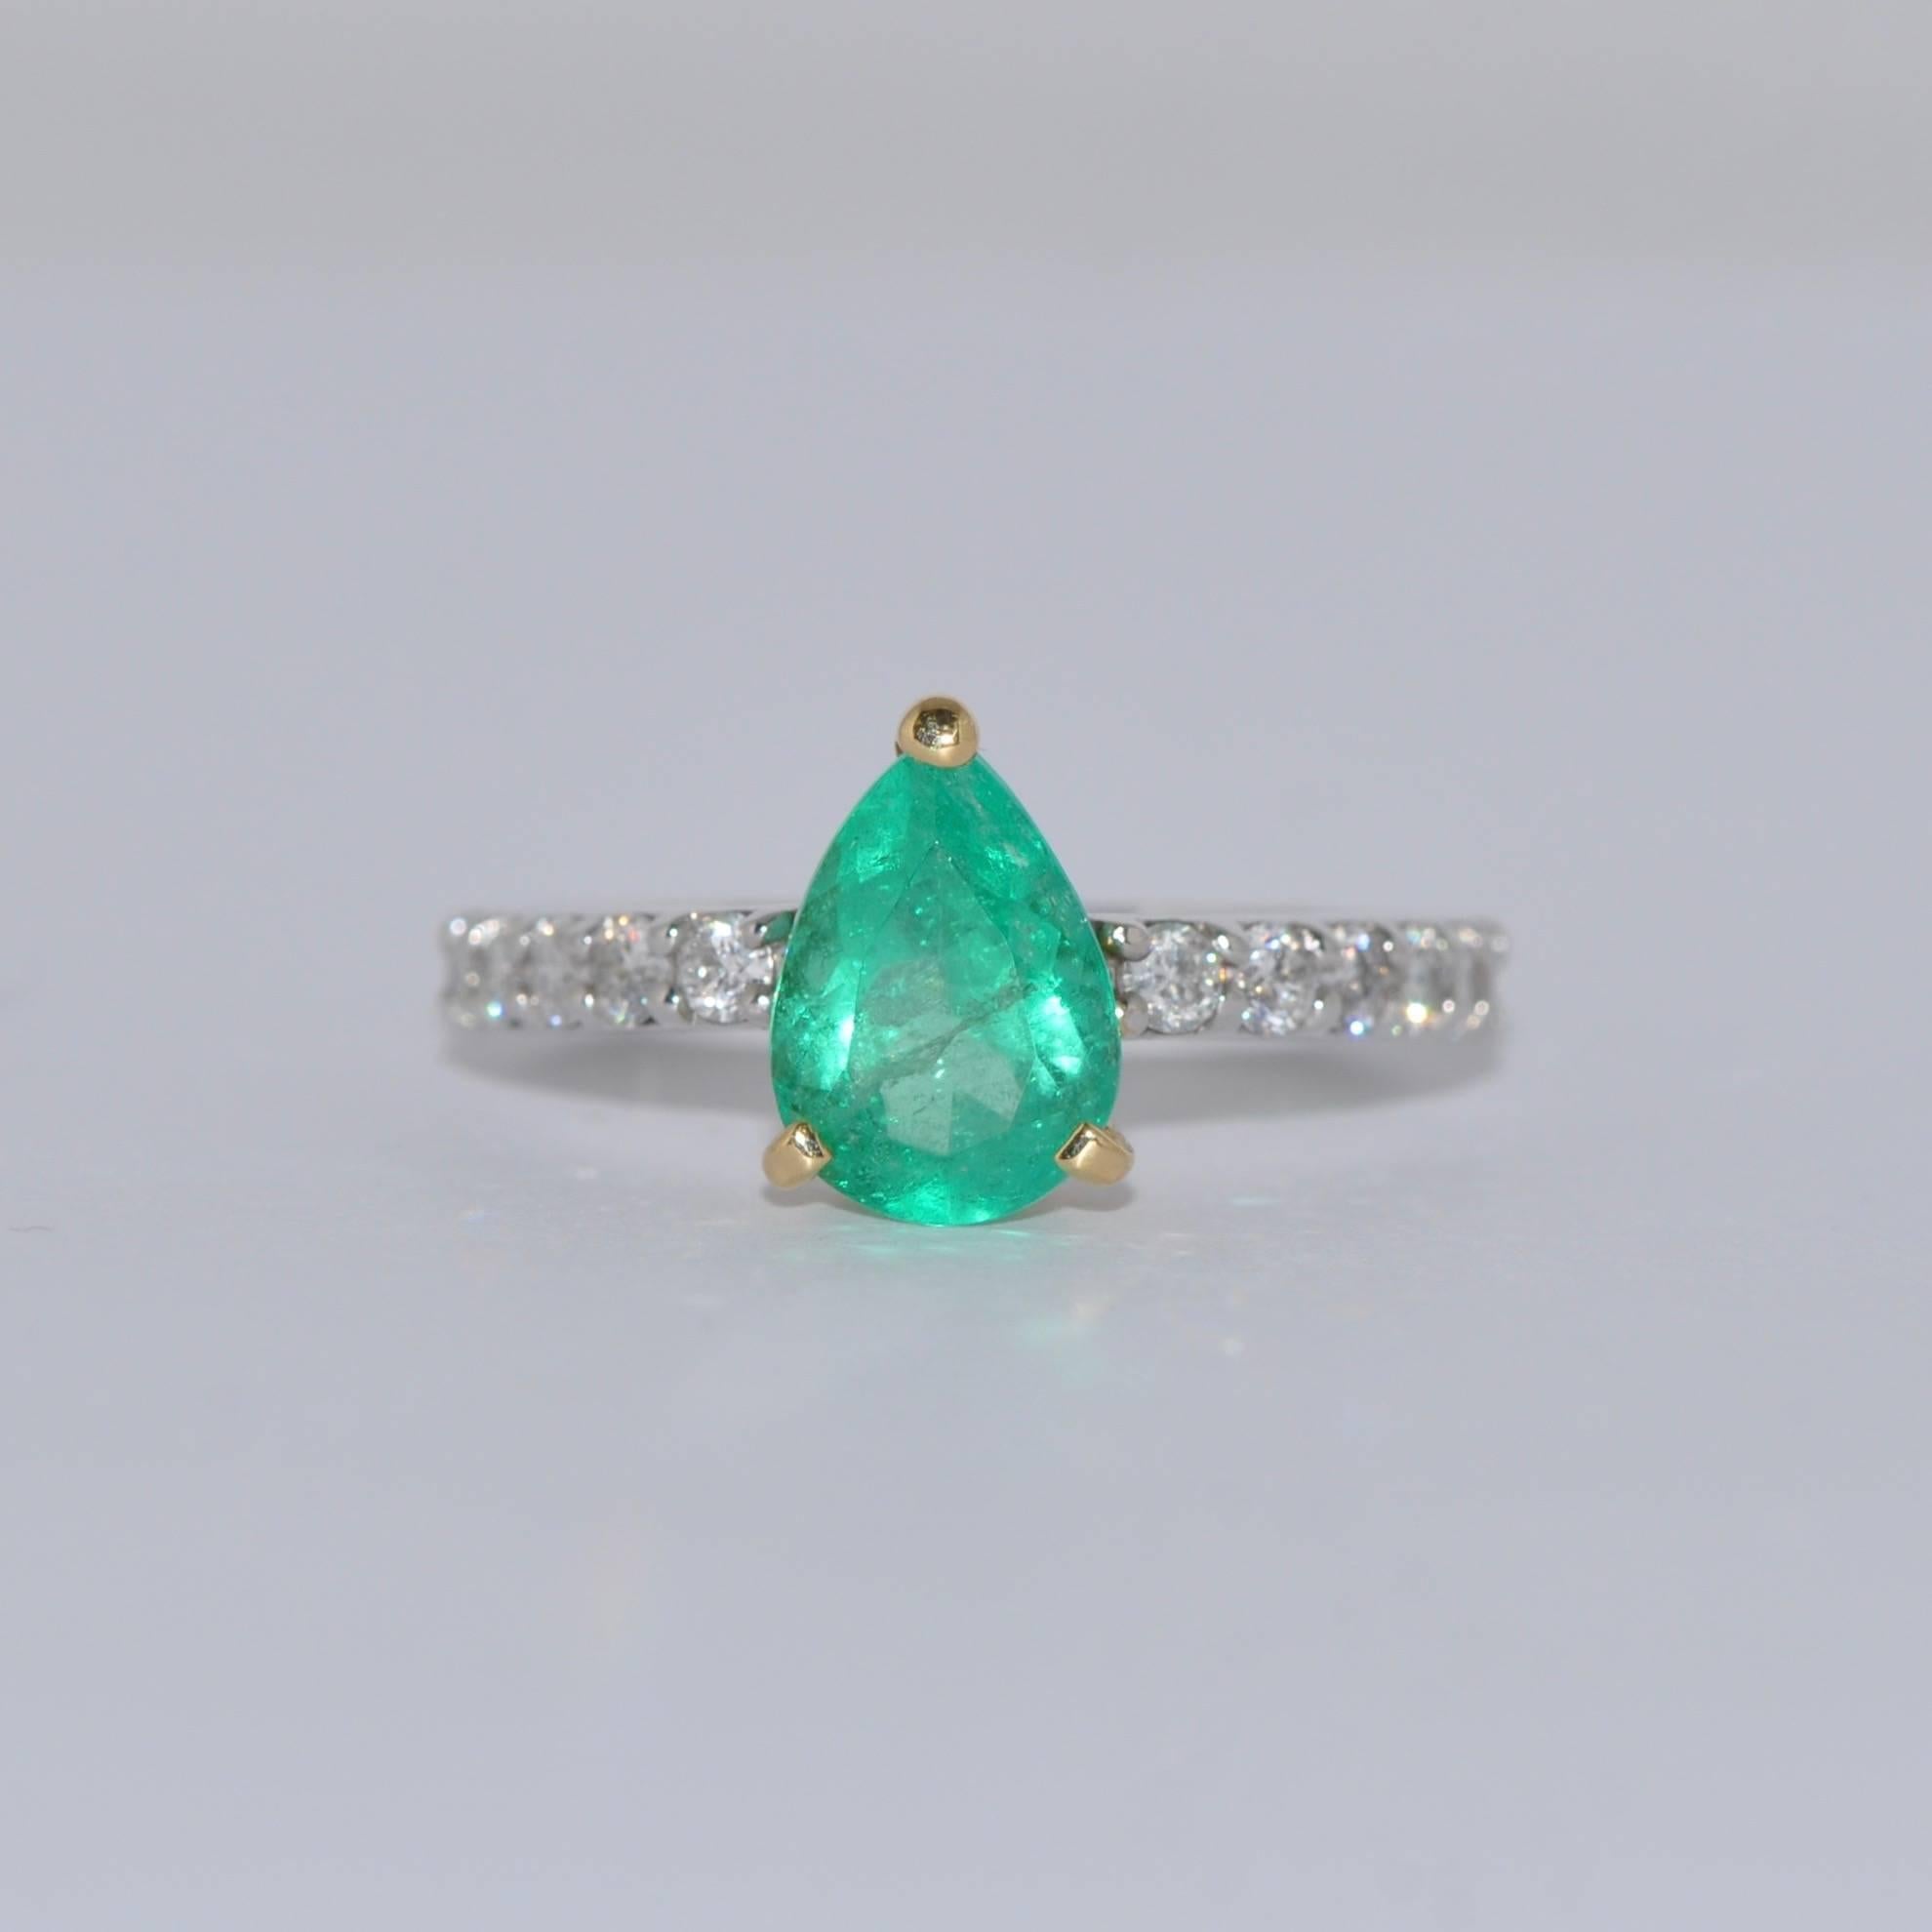 The ring we present is adorned with a magnificent 1.41-carat emerald, cut with a perfection that sets it apart. Its pear shape gives it a unique allure, while its dazzling brilliance is an eye-catcher. This gemstone symbolizes the promise of deep,